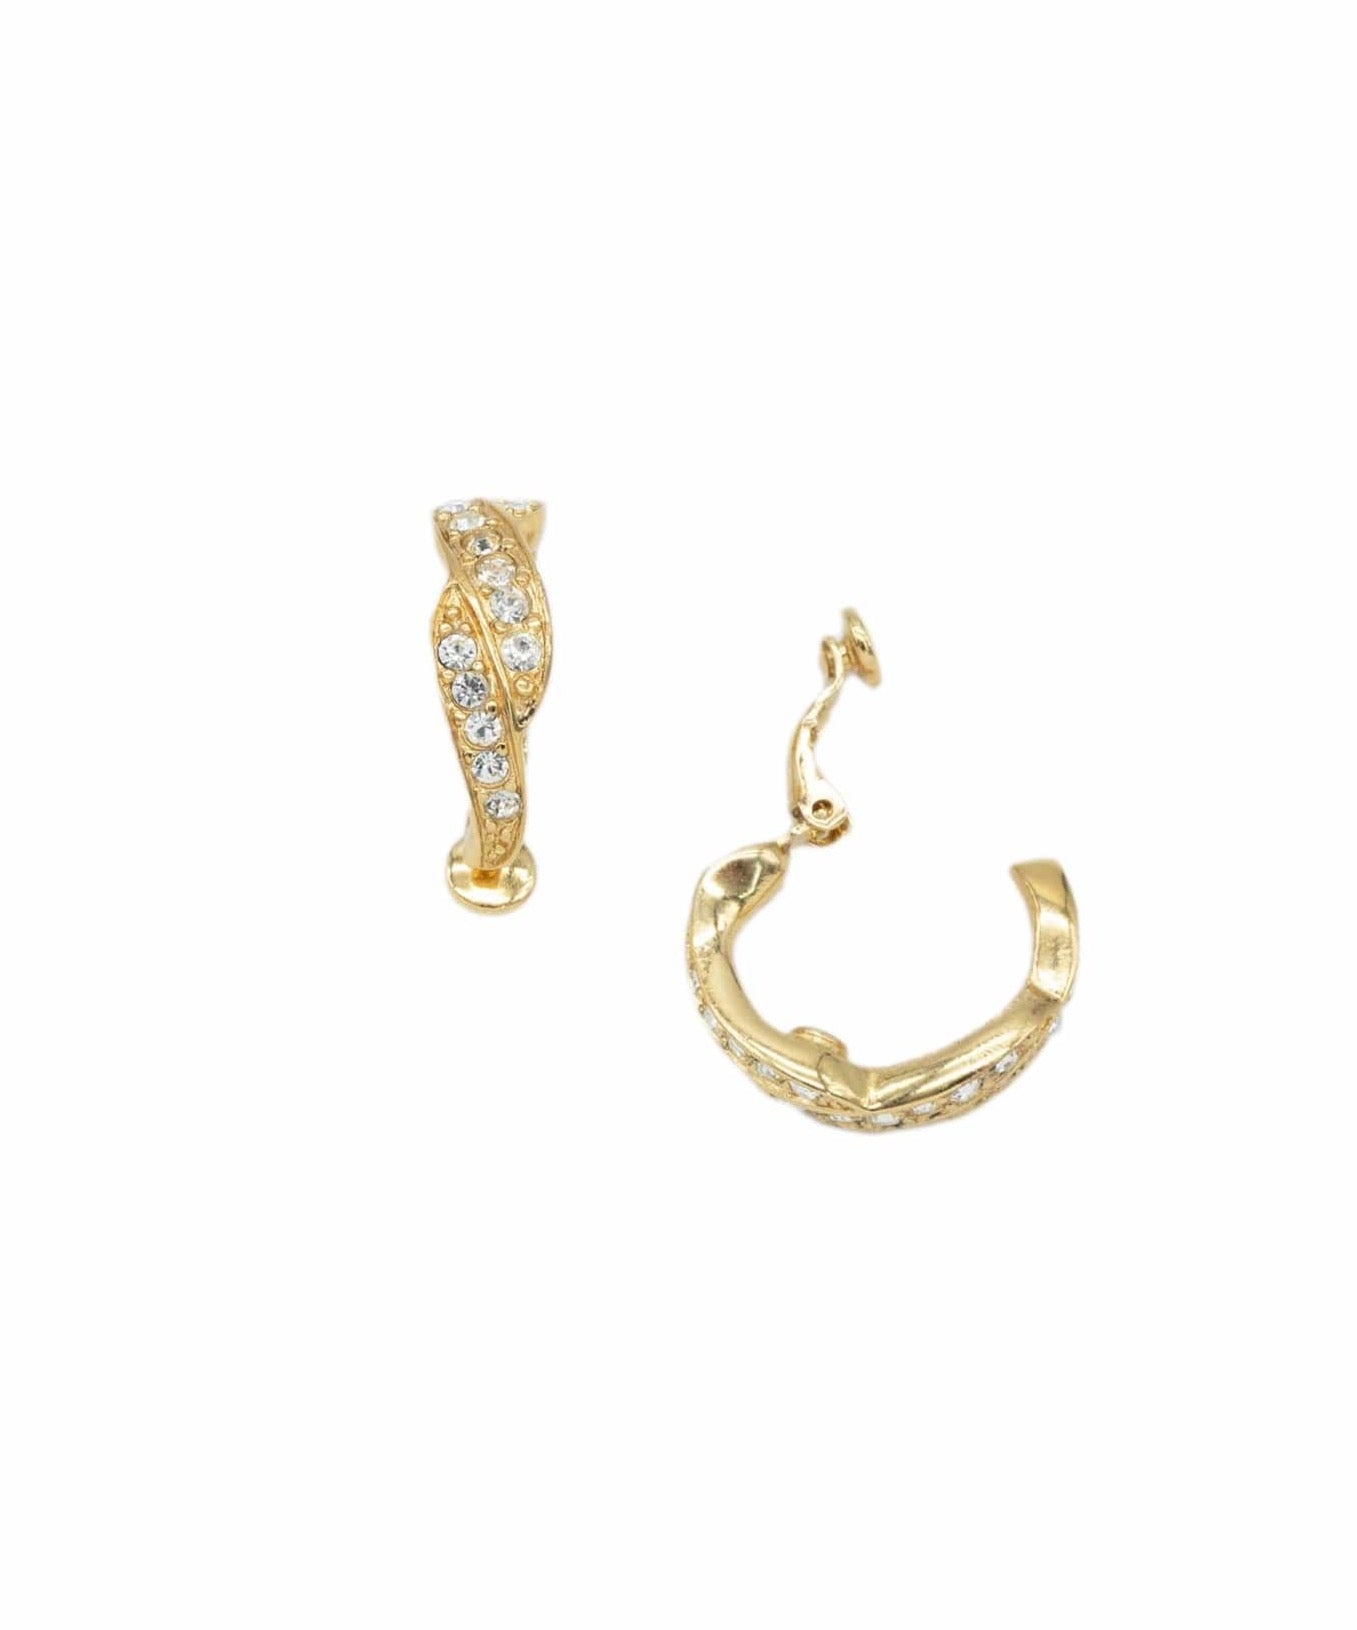 Givenchy Givenchy vintage hoop earrings with diamante AEL1152